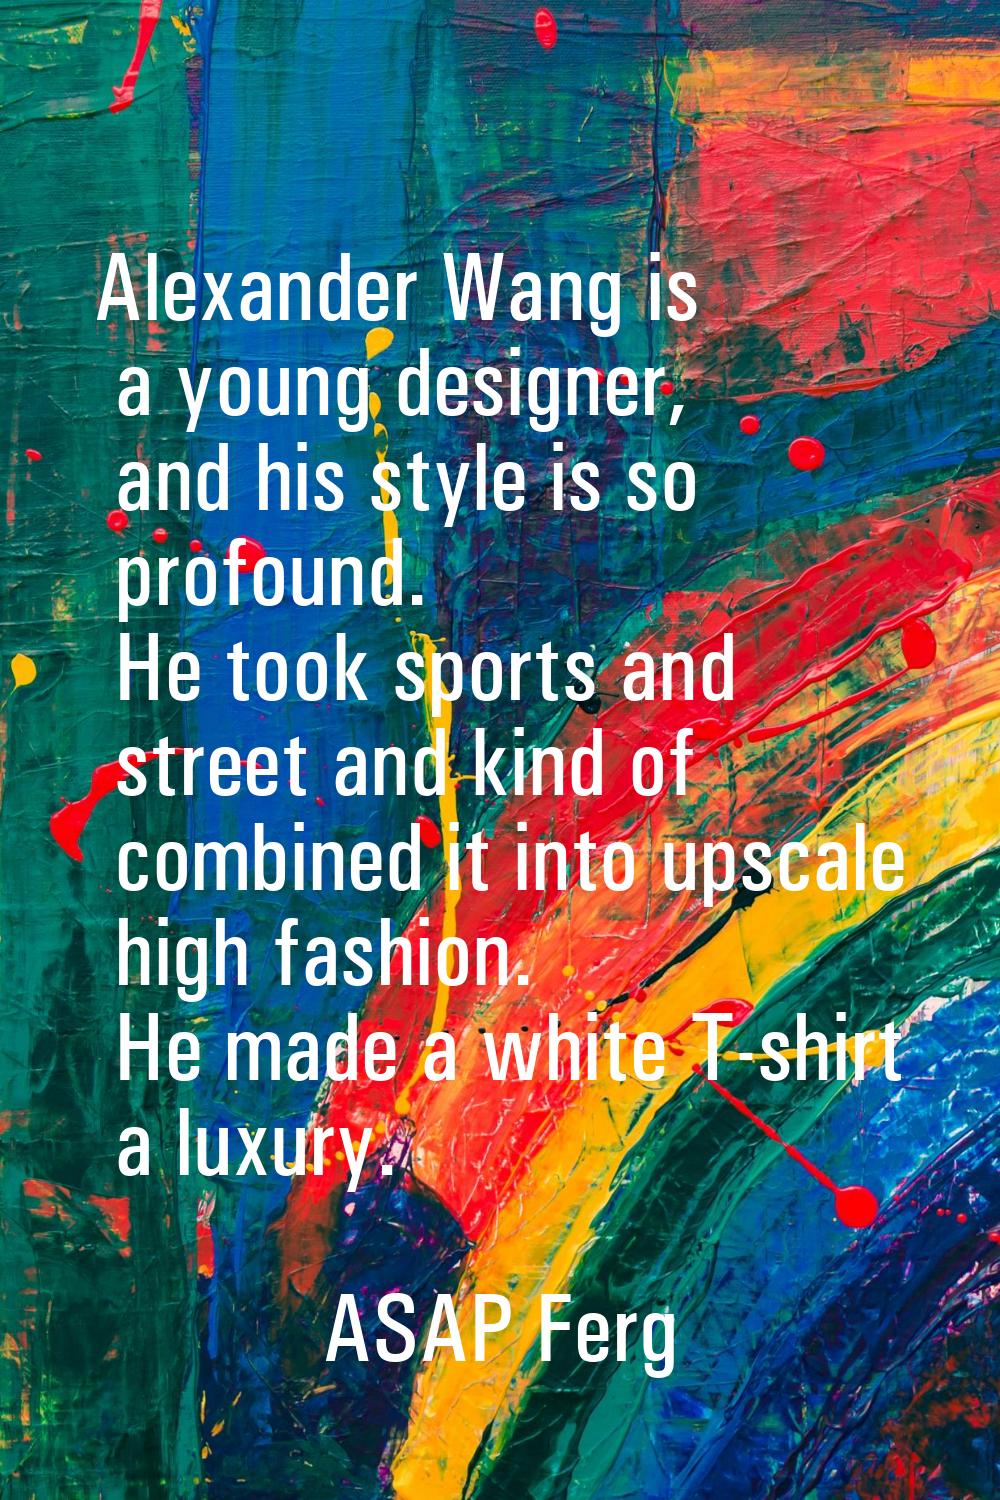 Alexander Wang is a young designer, and his style is so profound. He took sports and street and kin